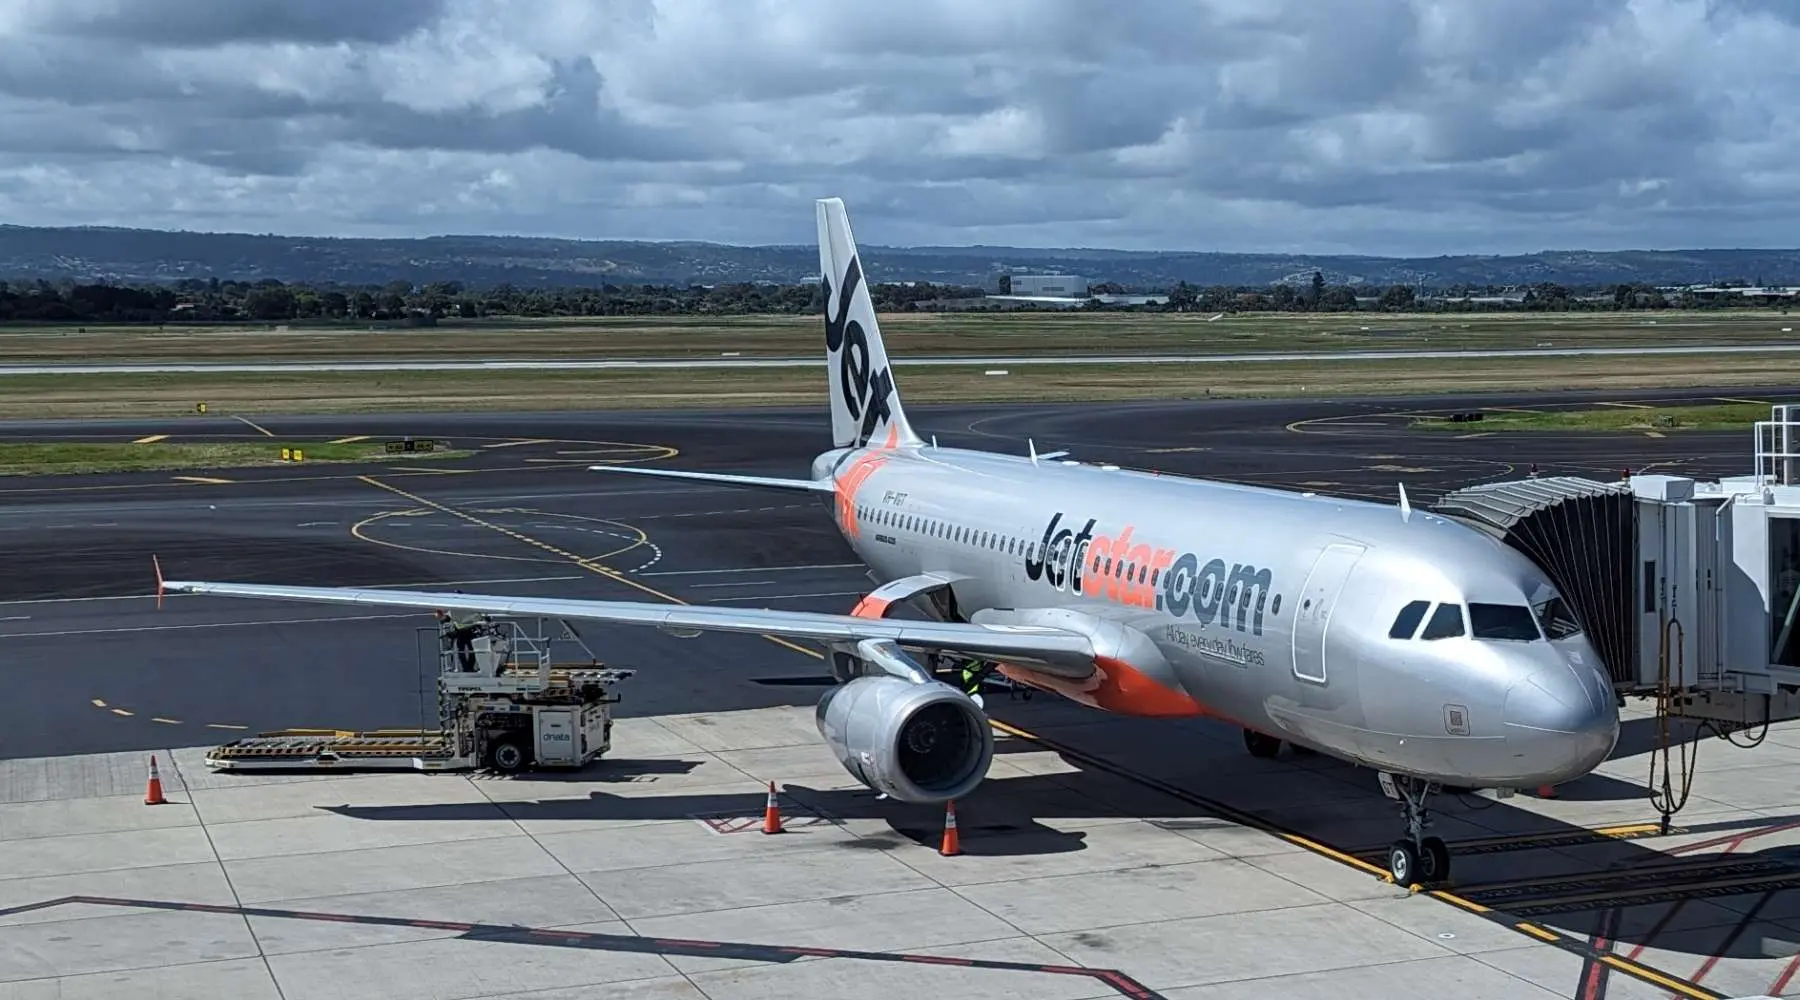 A Jetstar plane parked at Adelaide Airport